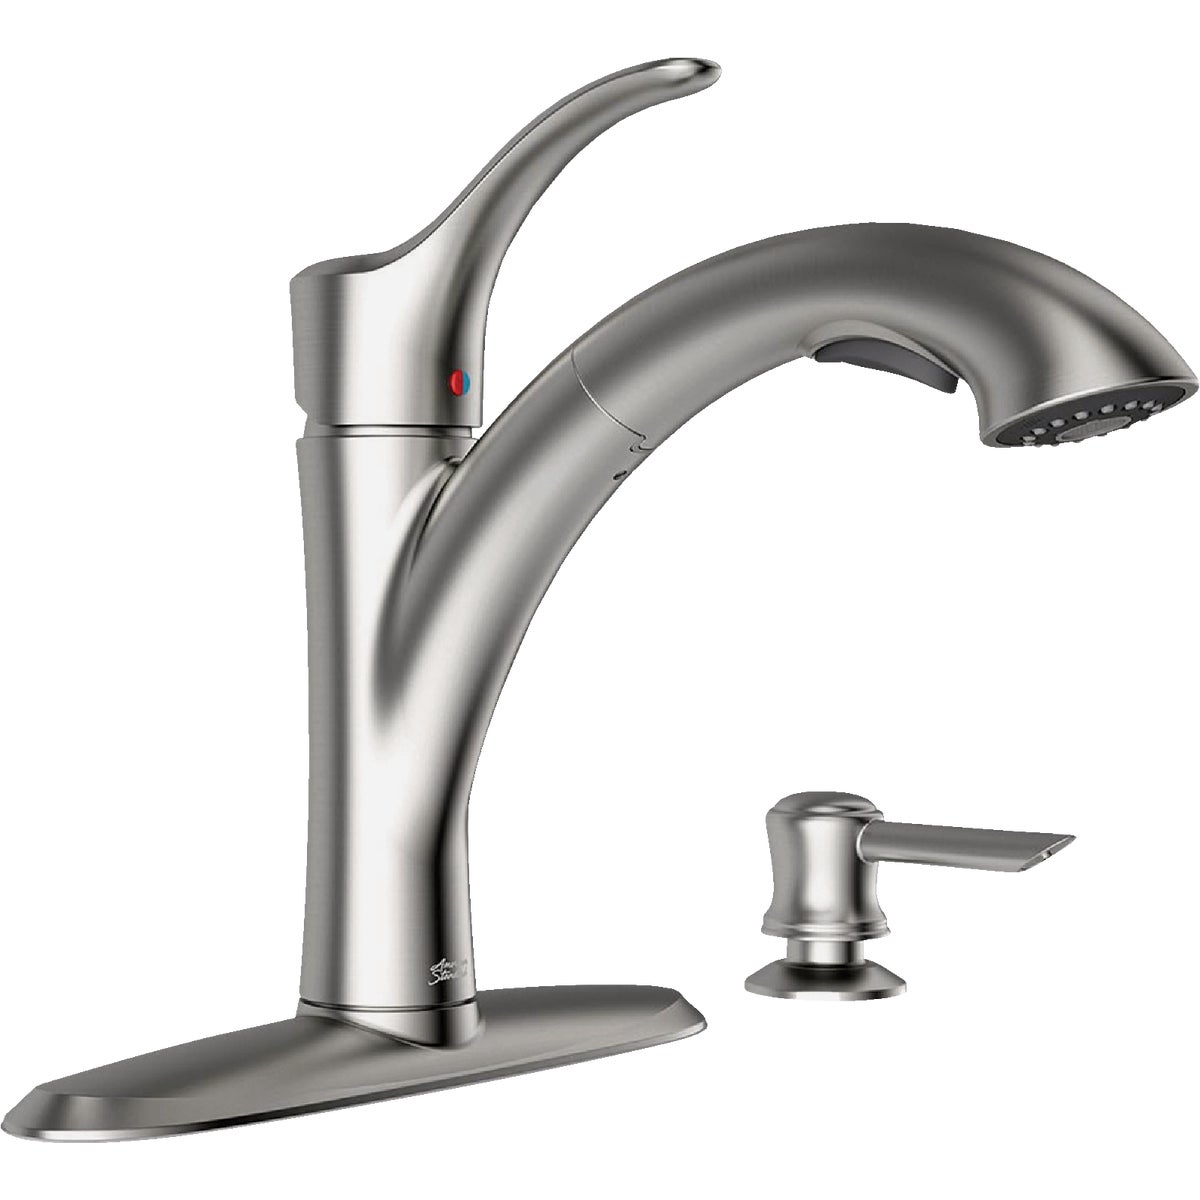 American Standard Mesa 1-Handle Lever Pull-Down Kitchen Faucet with Soap Dispenser, Stainless Steel